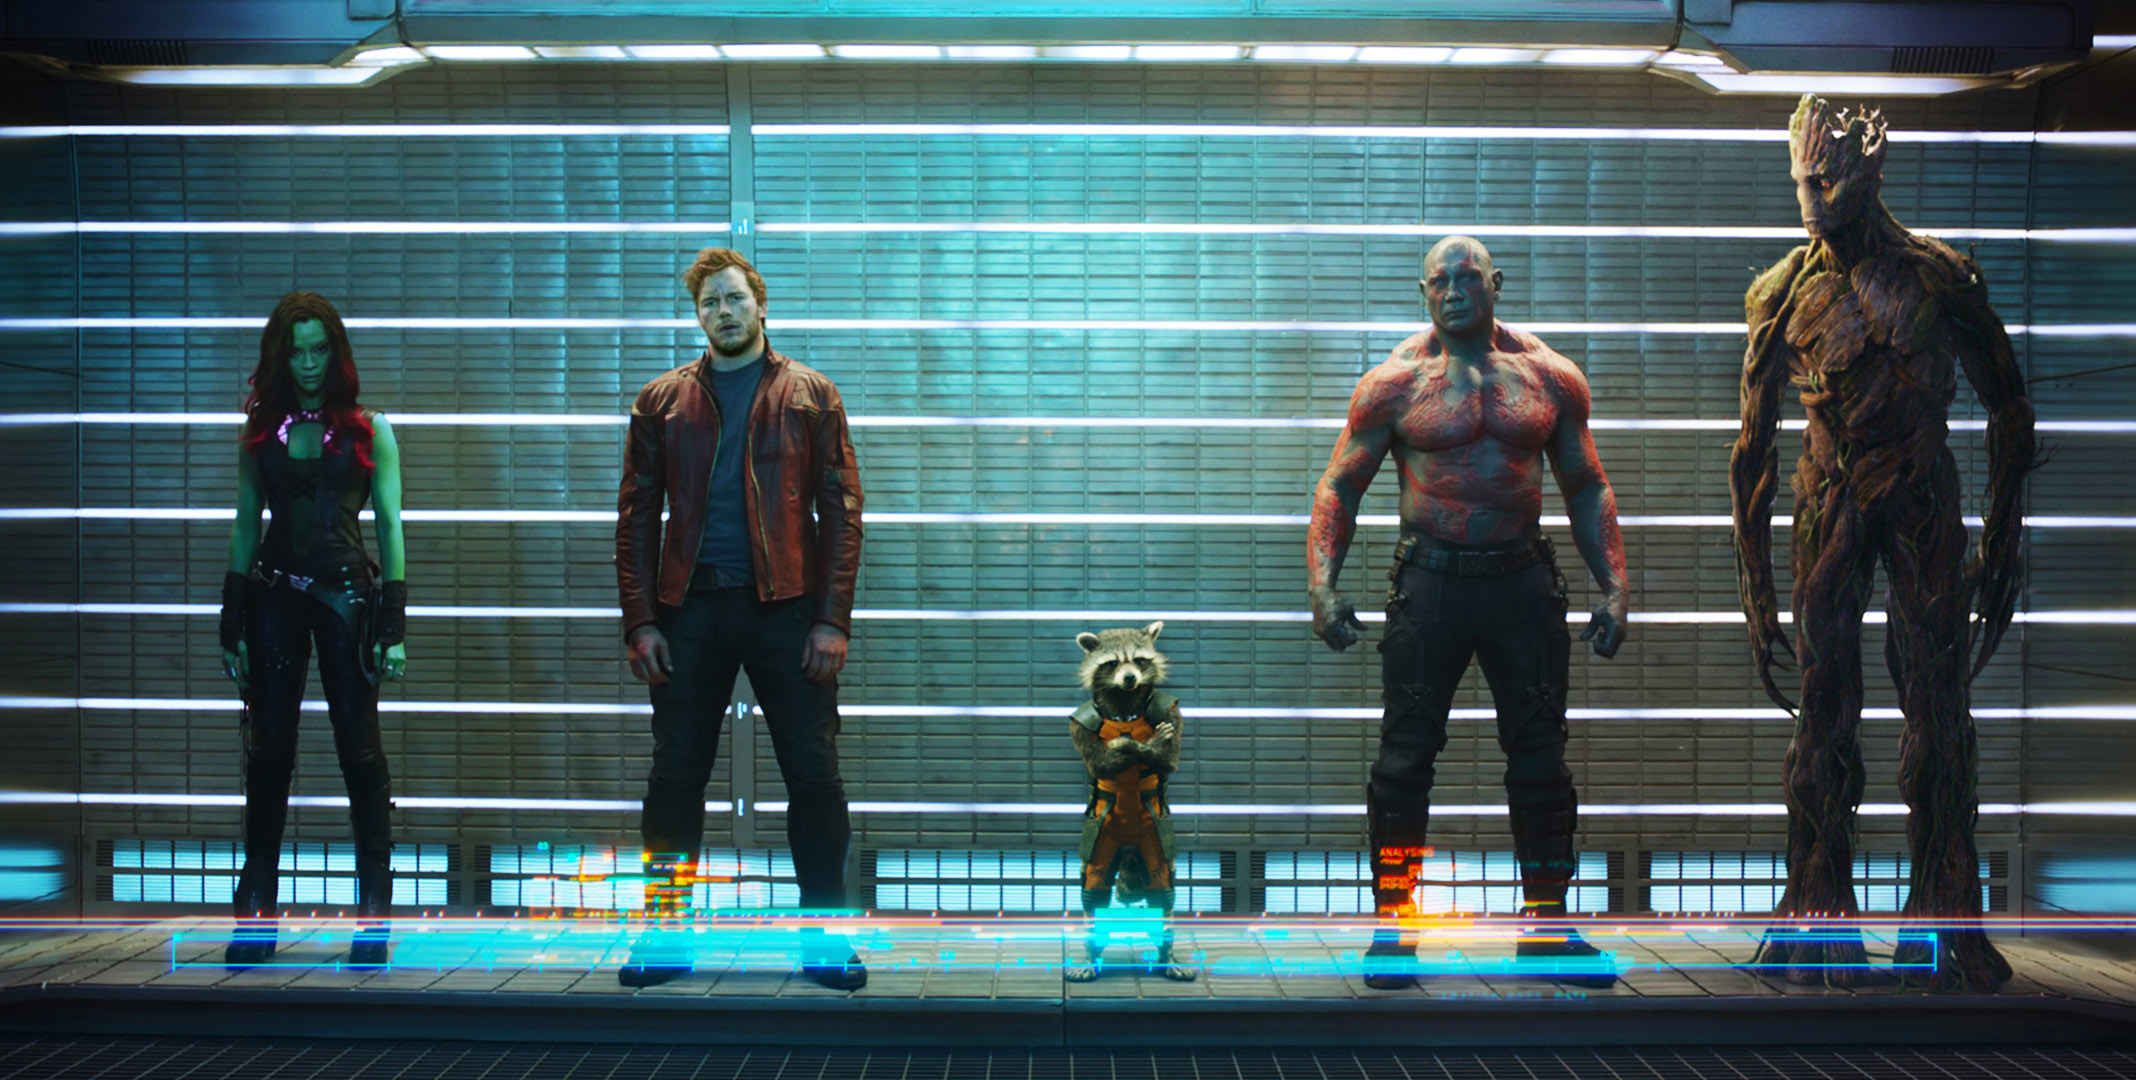 Screen shot from &quot;Guardians of the Galaxy&quot;